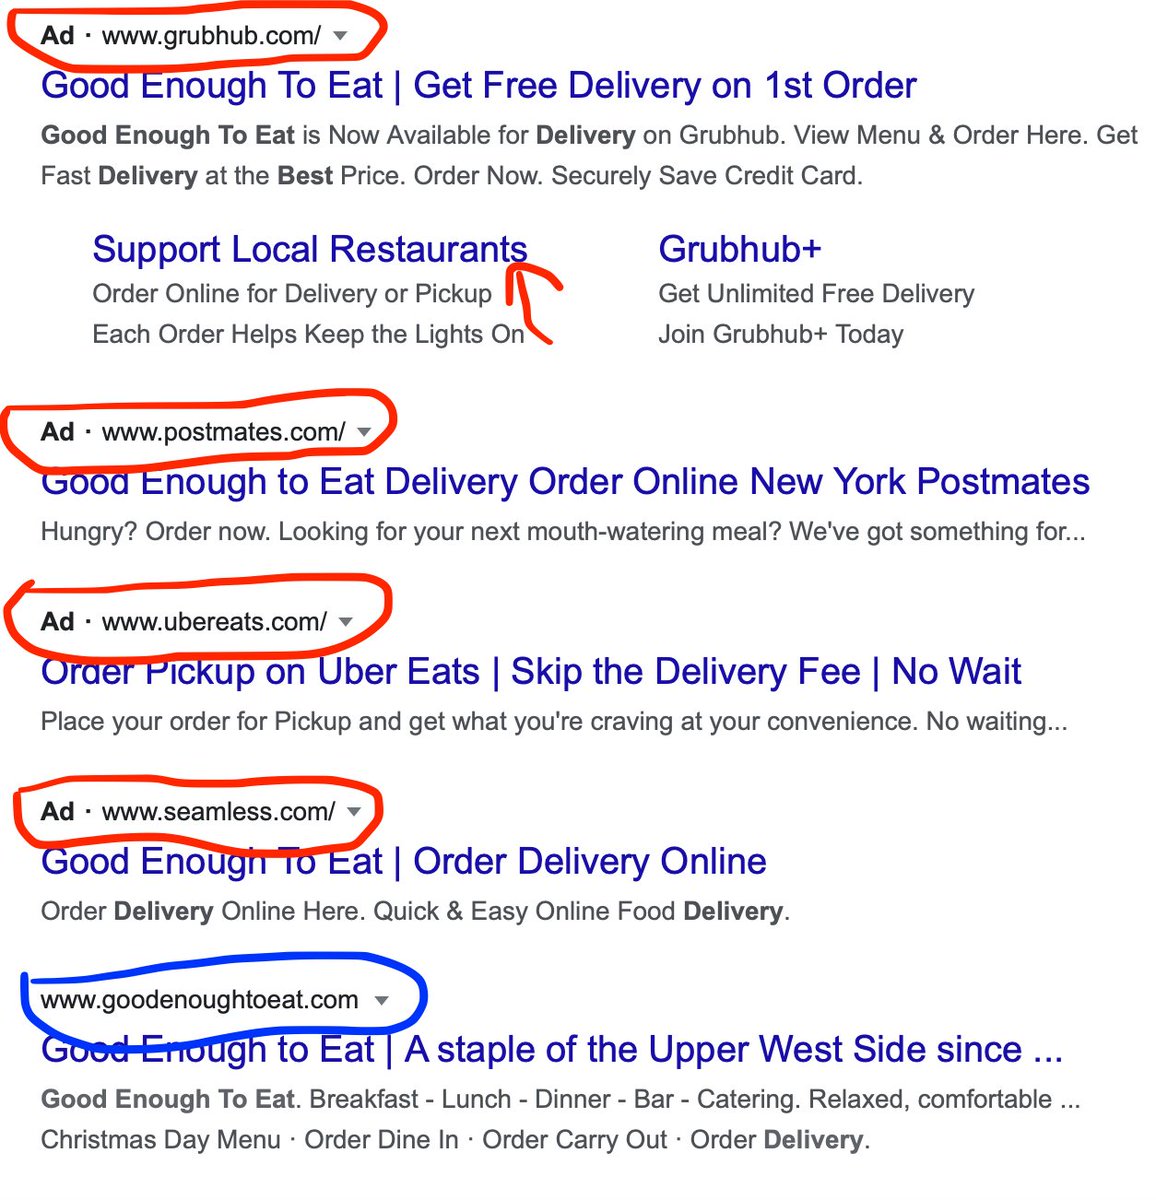 3/8 Or a customer  @Google's the restaurant they want to order food from and uses the word “delivery”FOUR 3rd party delivery sites appear before the restaurant's website.  @Grubhub even says "Support Local Restaurants" which is the opposite of what happens if you click this link.